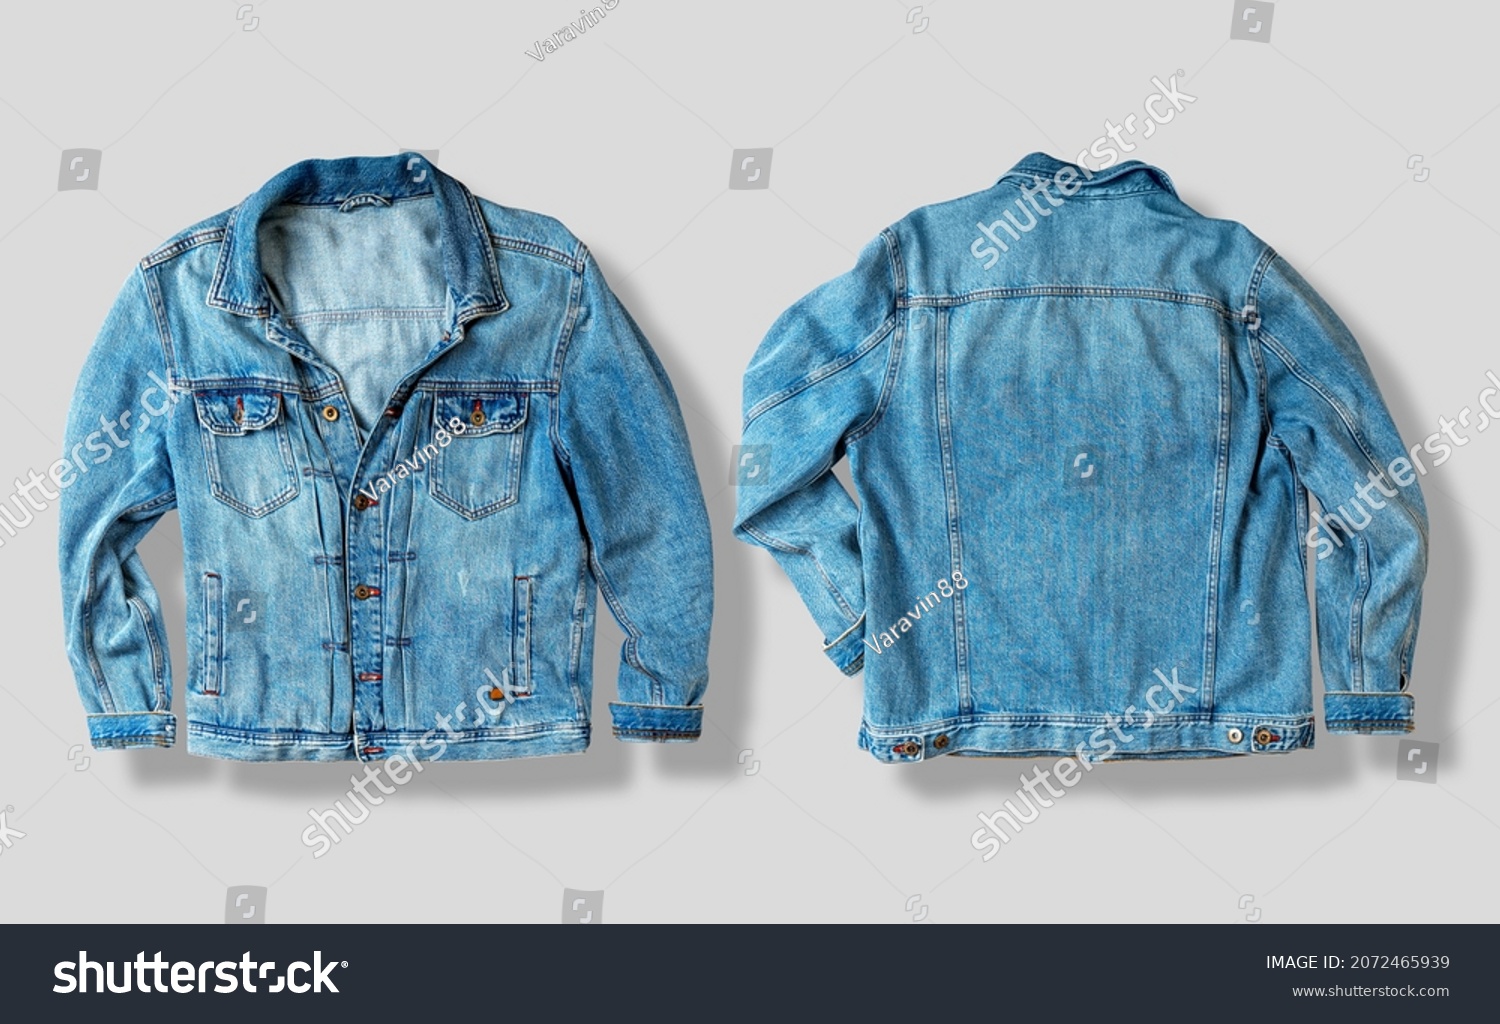 Jean jacket isolated on white. Front and back views. Ready for clipping path. #2072465939